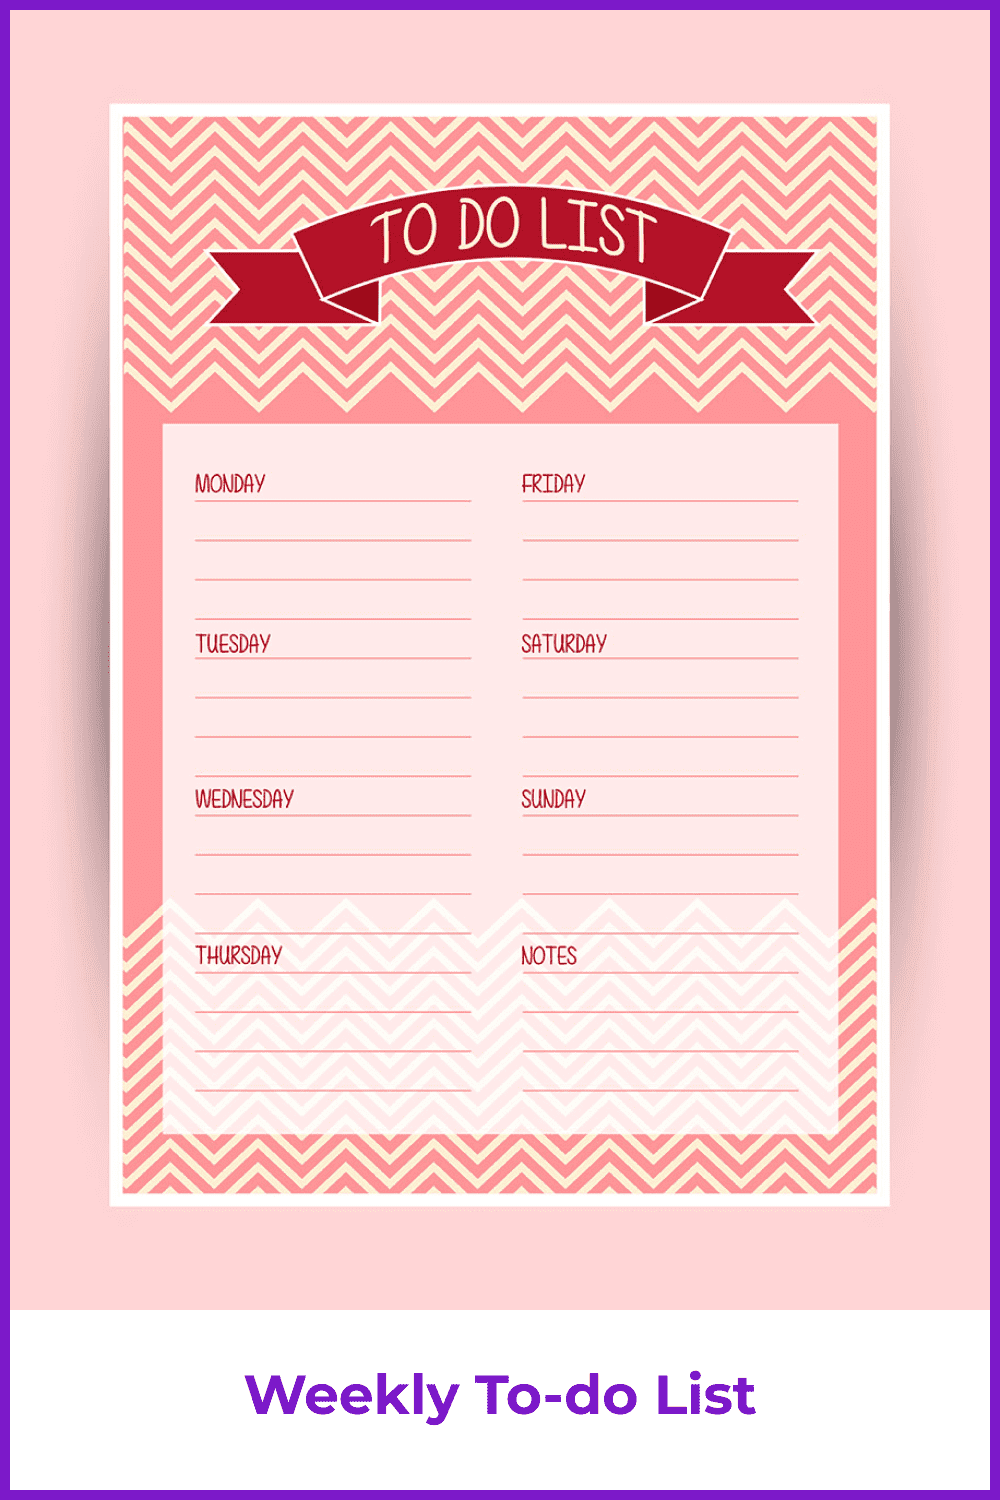 Planner in pink and red with geometric lines.